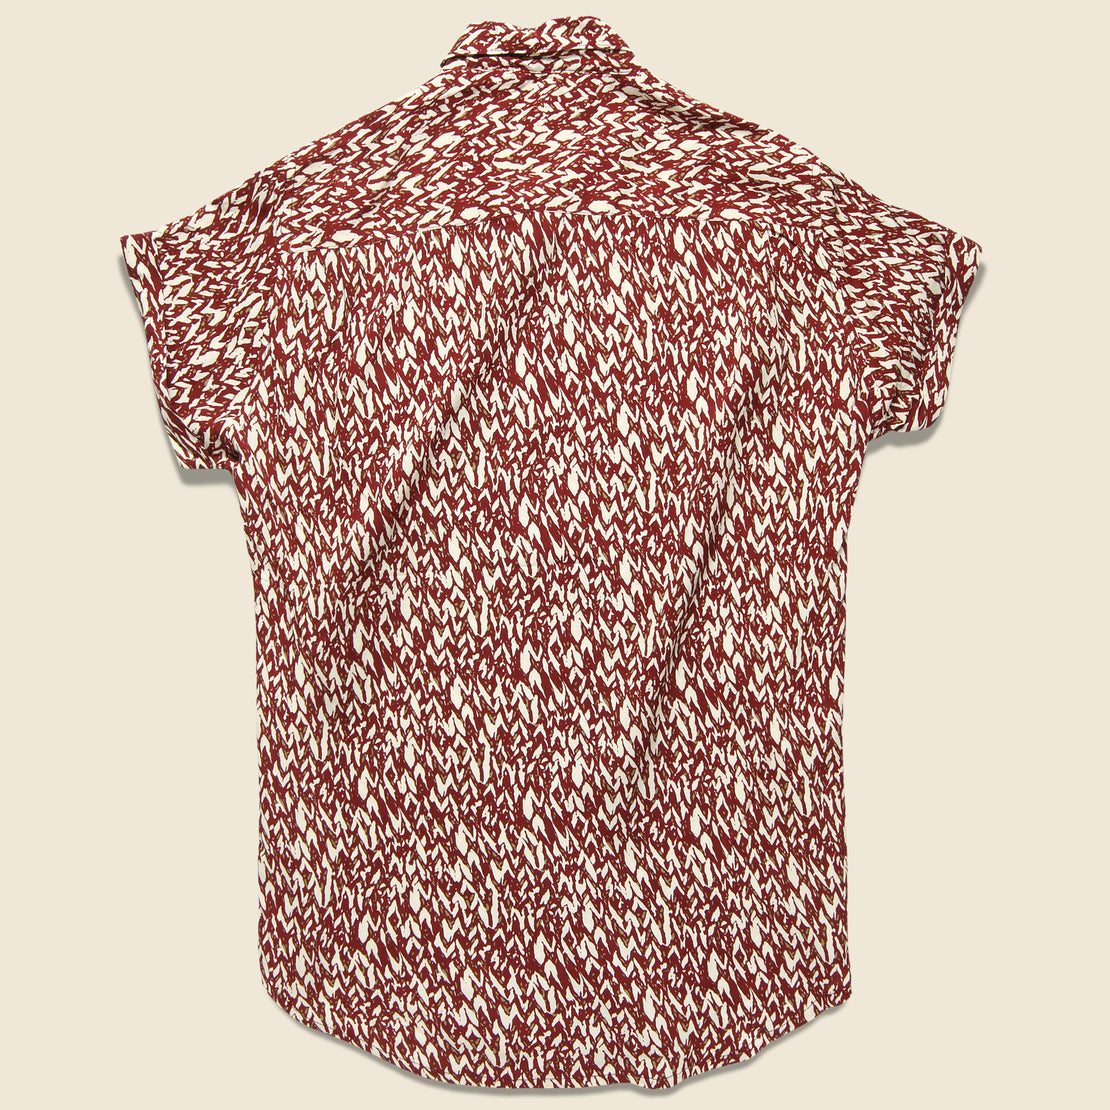 Bea Top - Red Print - Bridge & Burn - STAG Provisions - W - Tops - S/S Woven